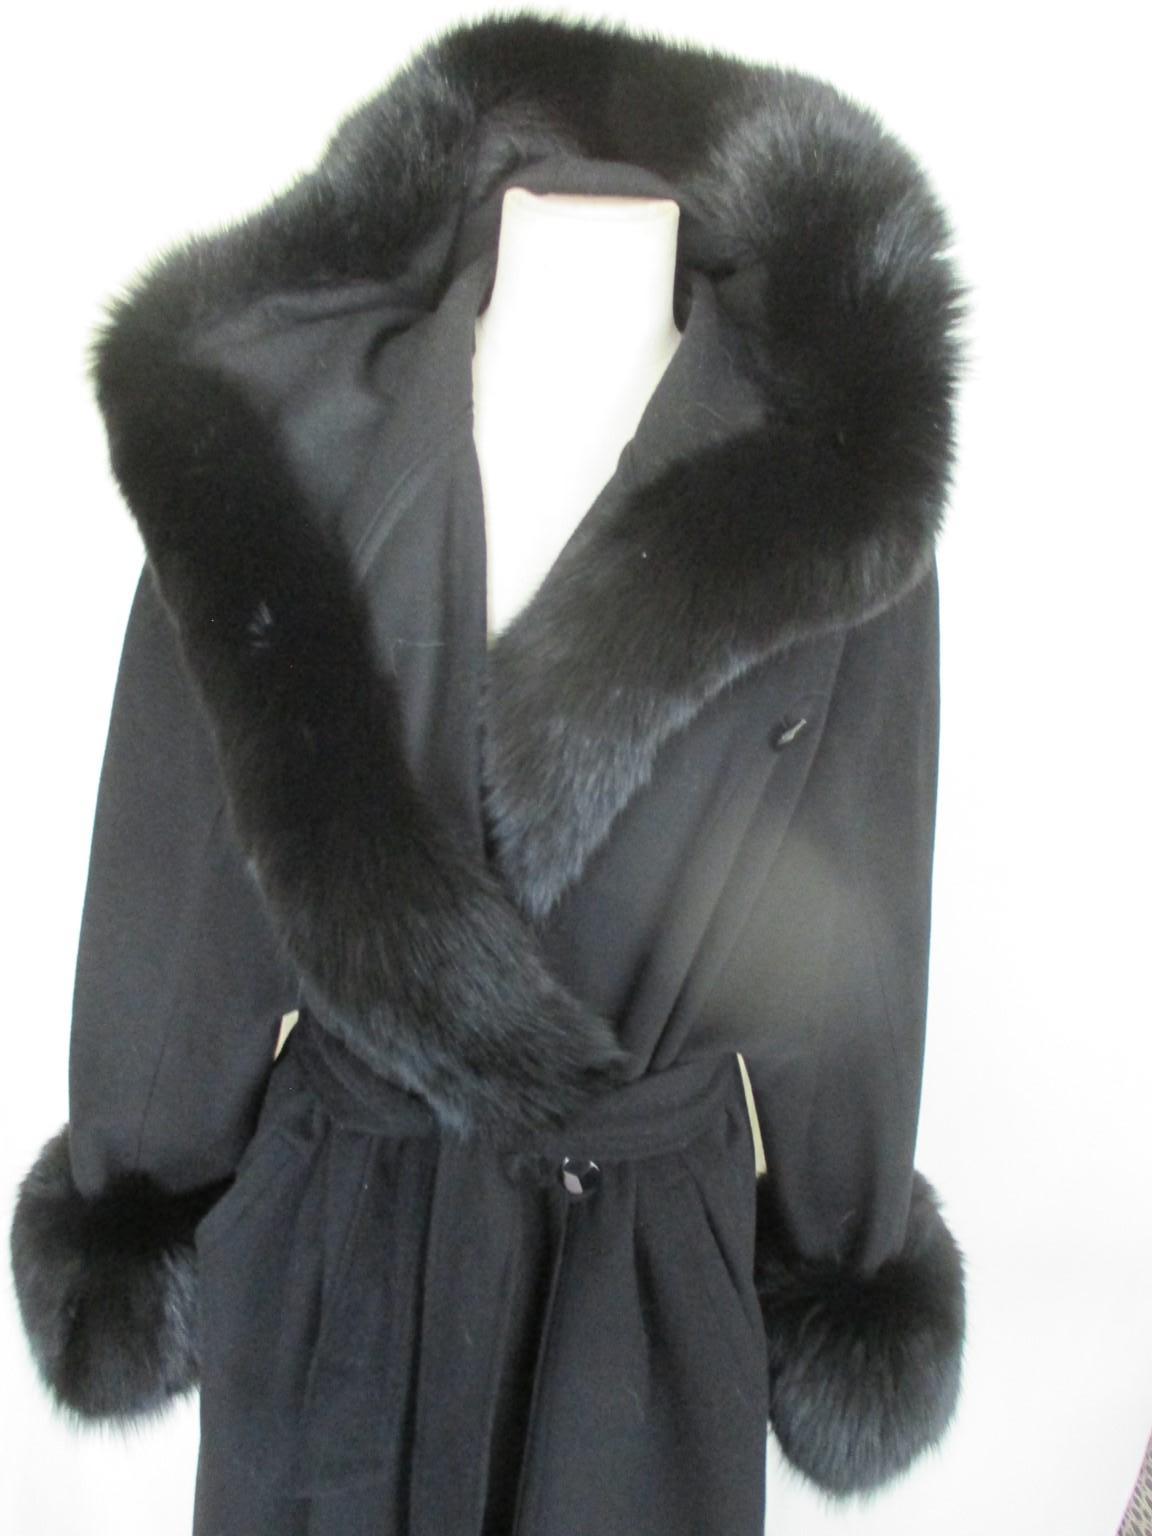 Flared Cashmere/wool coat with attached hood and soft black fox fur

 We offer more luxury fur and vintage items, view our frontstore.

Details:
Color: black
50% cashmere/ 50% lambs wool
Attached hood 
Trimmed with soft black fox fur
2 pockets
2